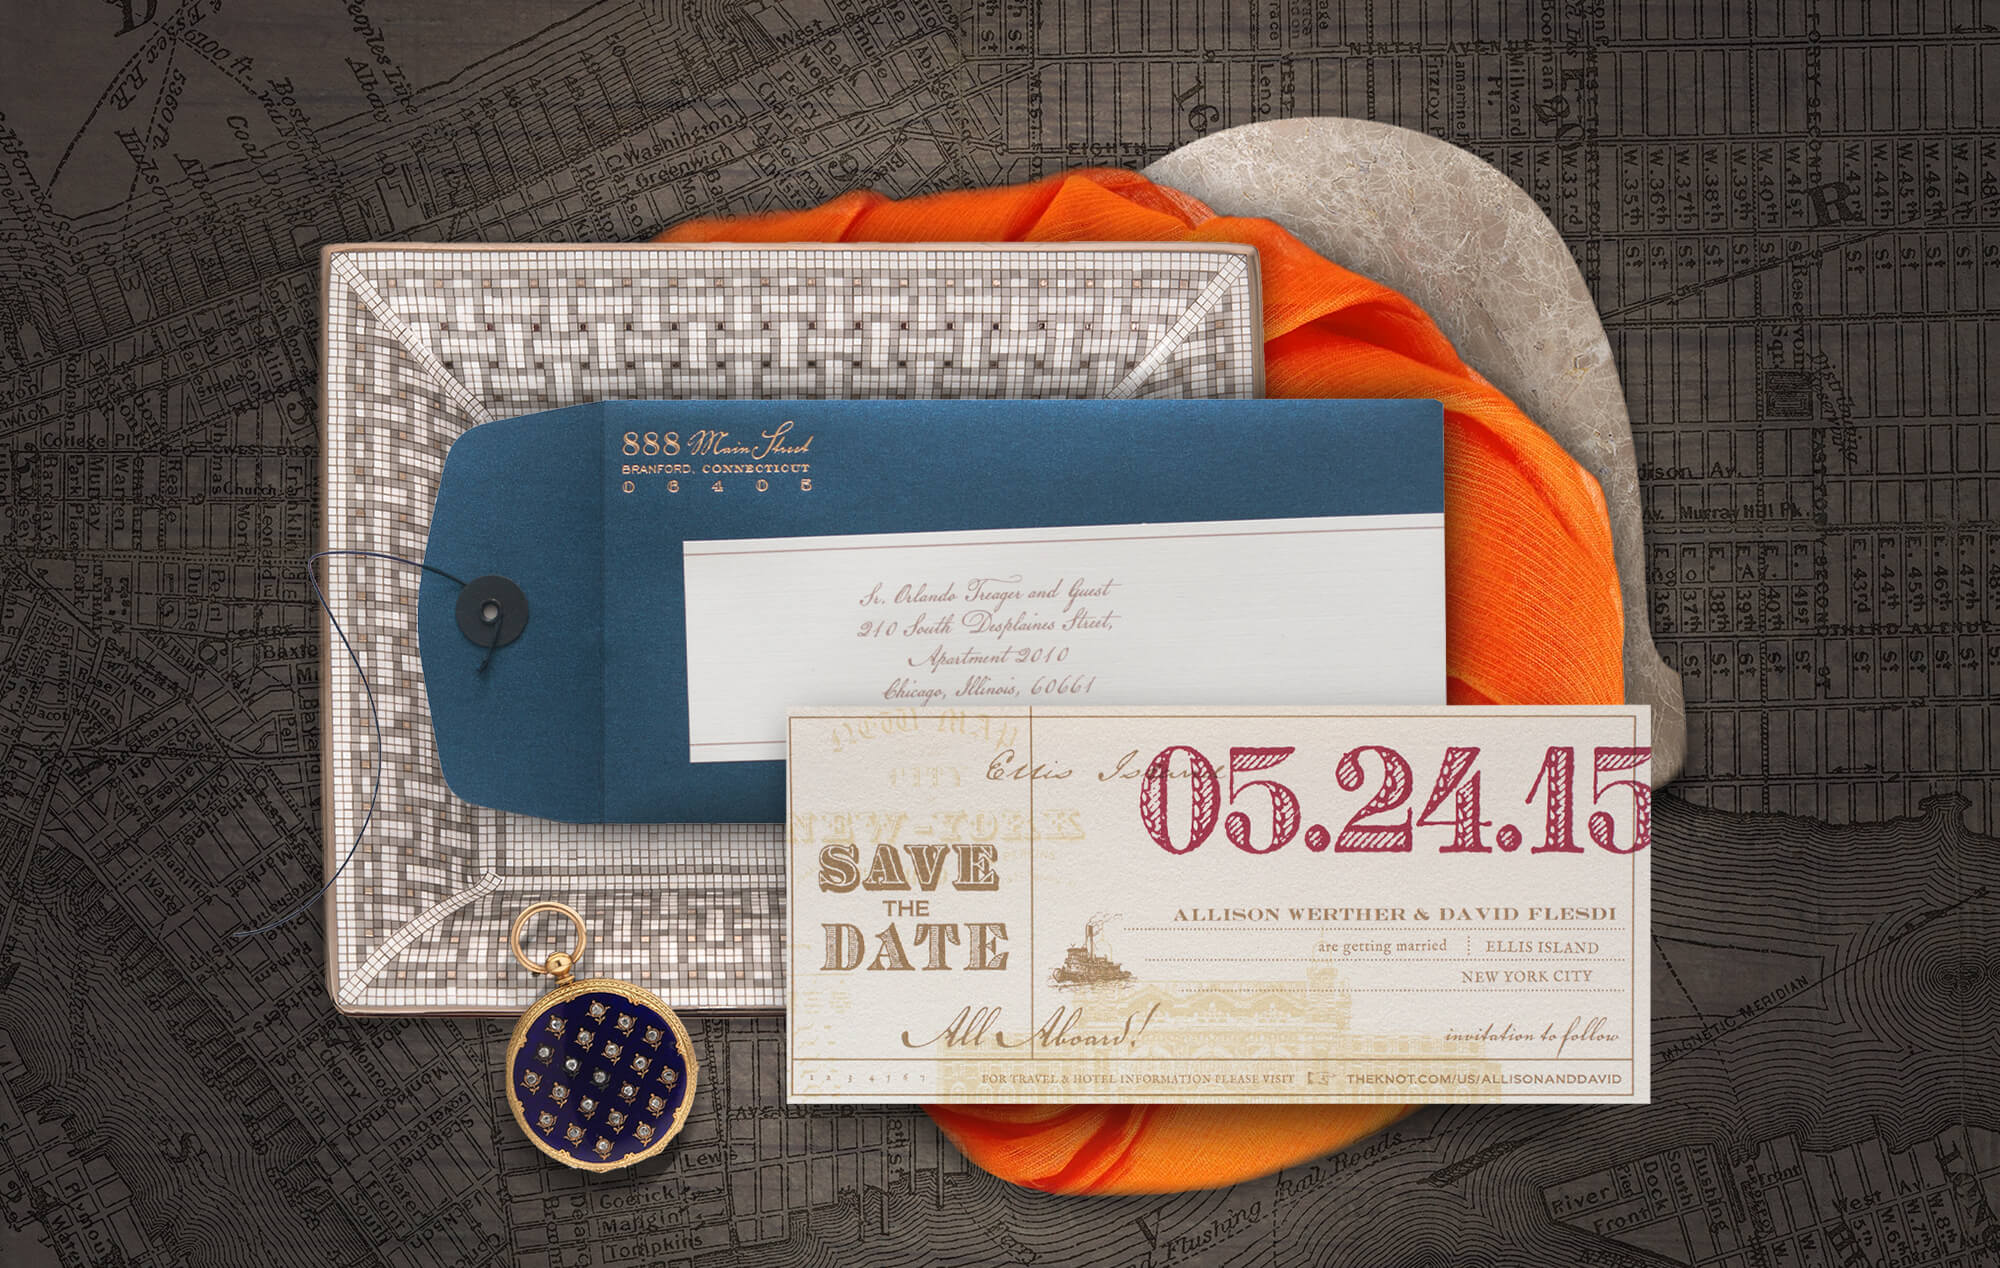 Ellis Island vintage save the date inspired by travel tickets